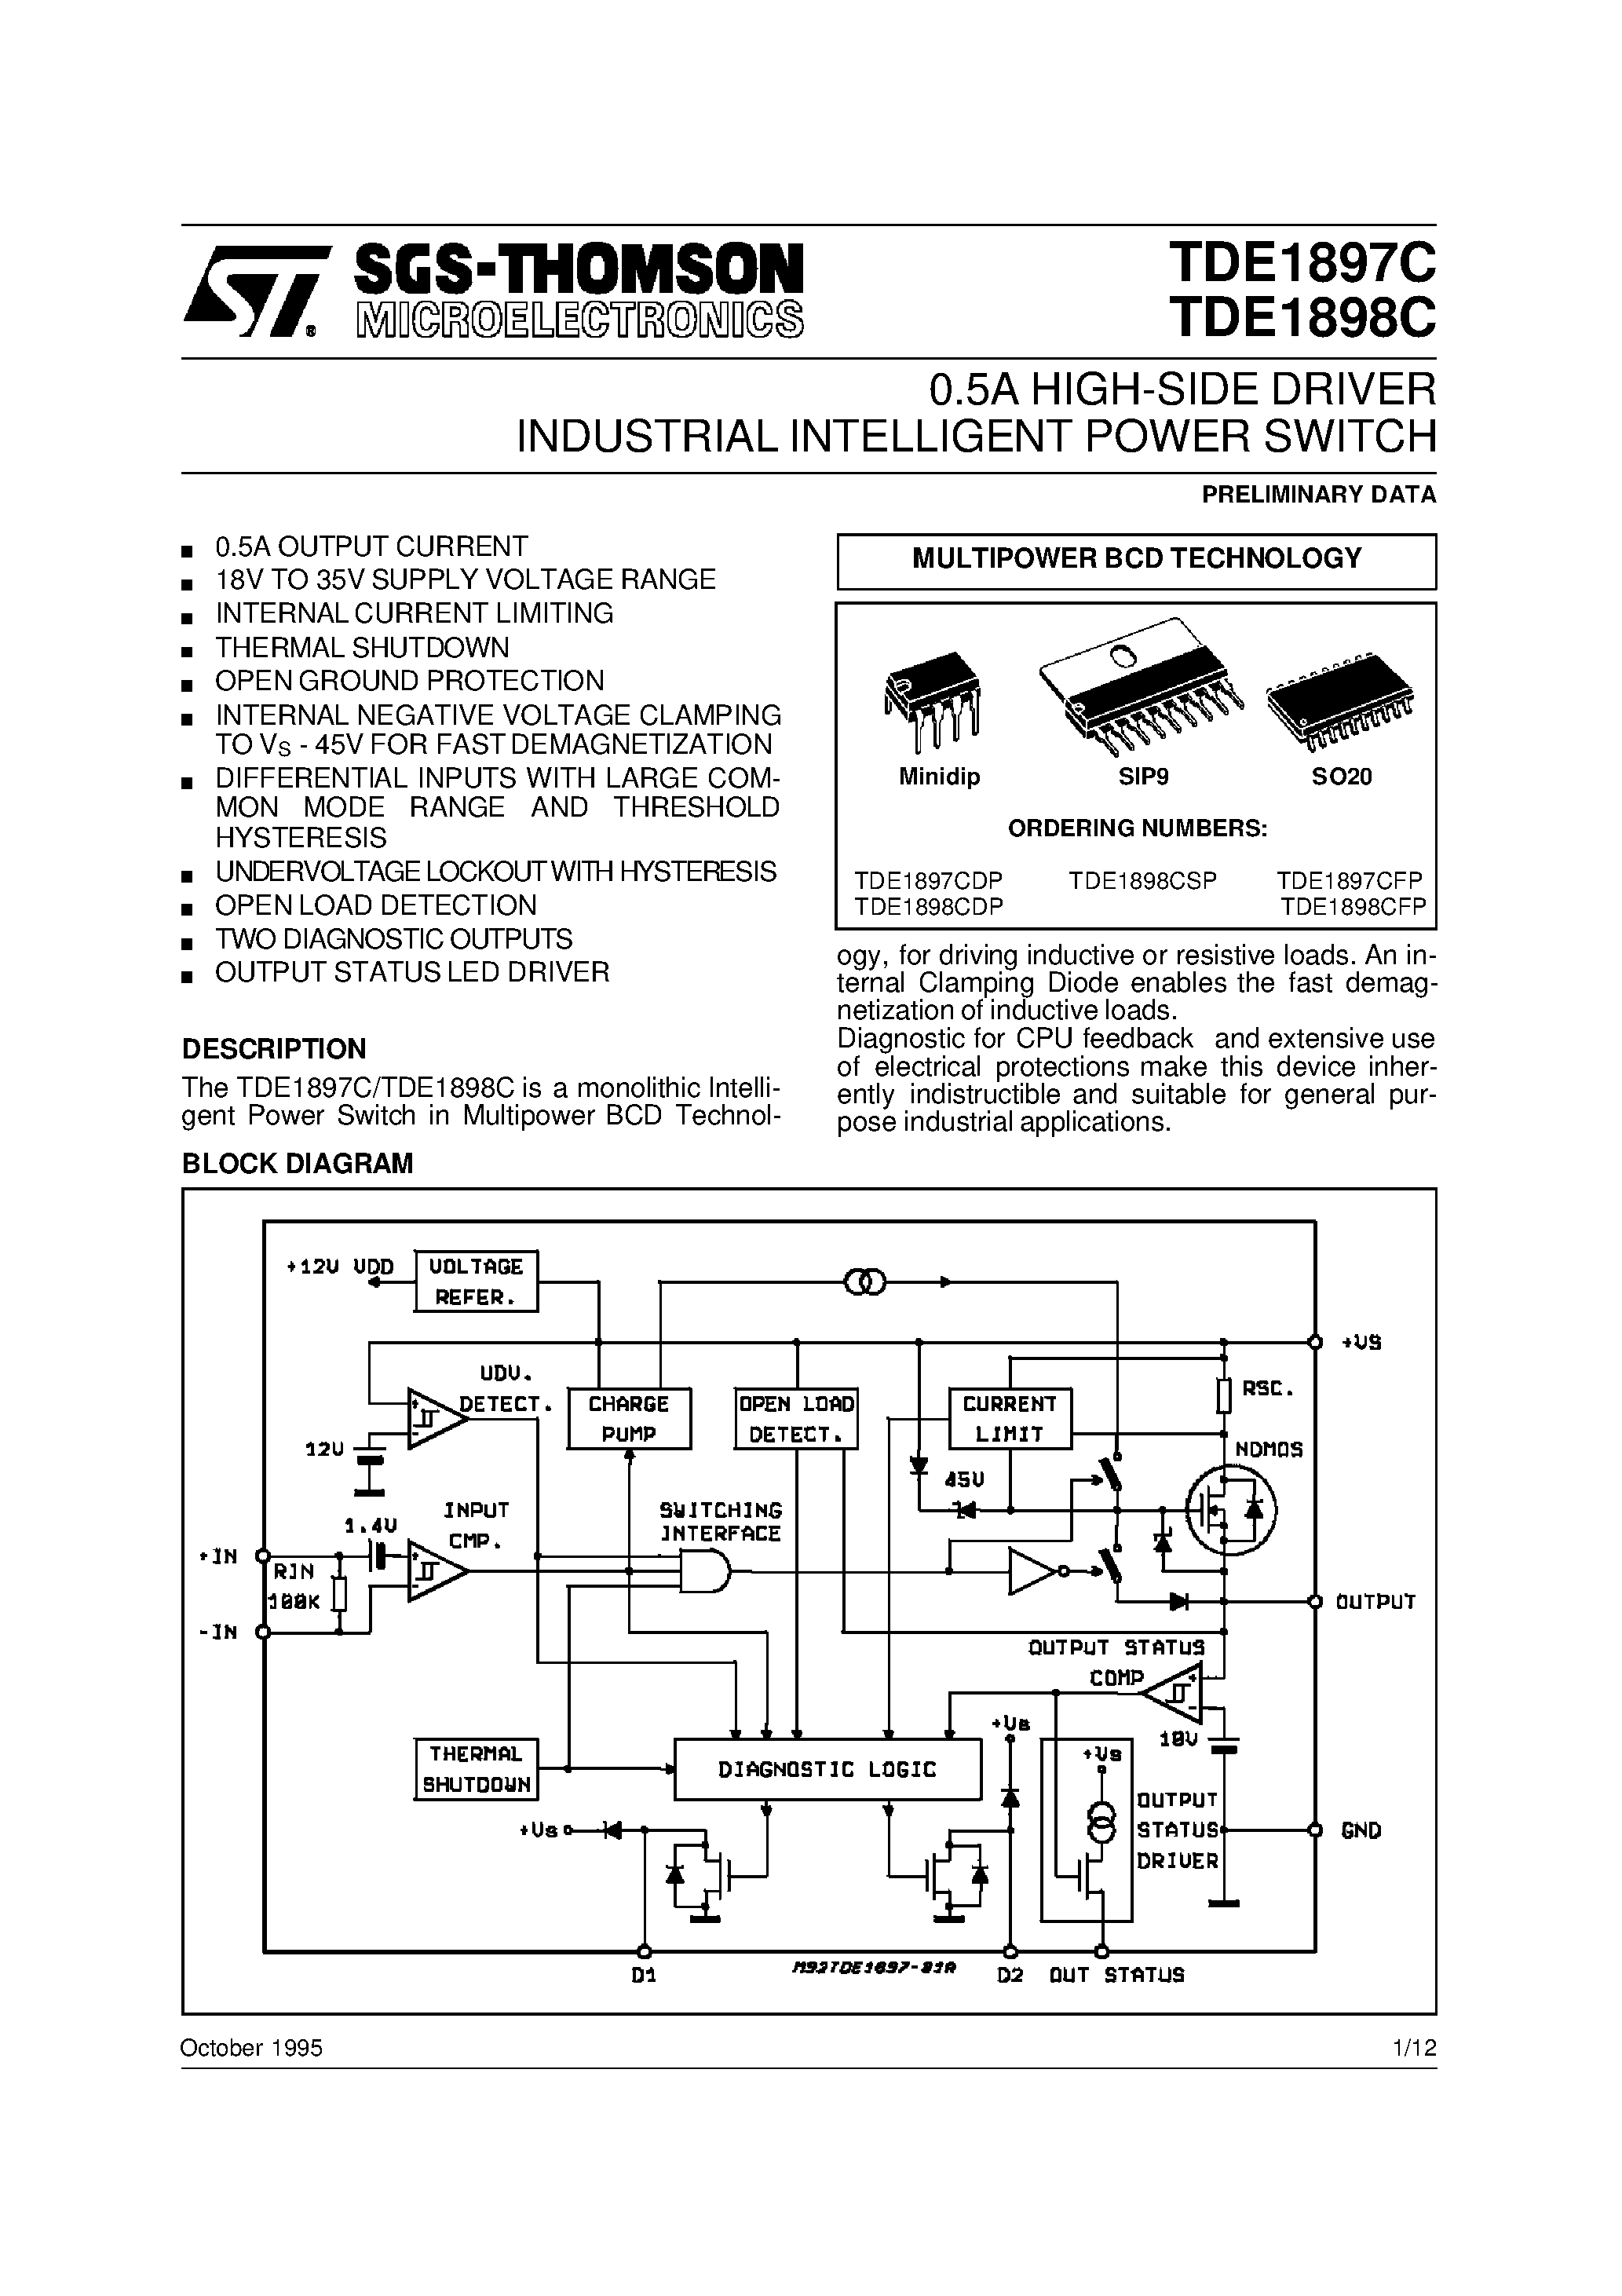 Datasheet TDE1897C - 0.5A HIGH-SIDE DRIVER INDUSTRIAL INTELLIGENT POWER SWITCH page 1